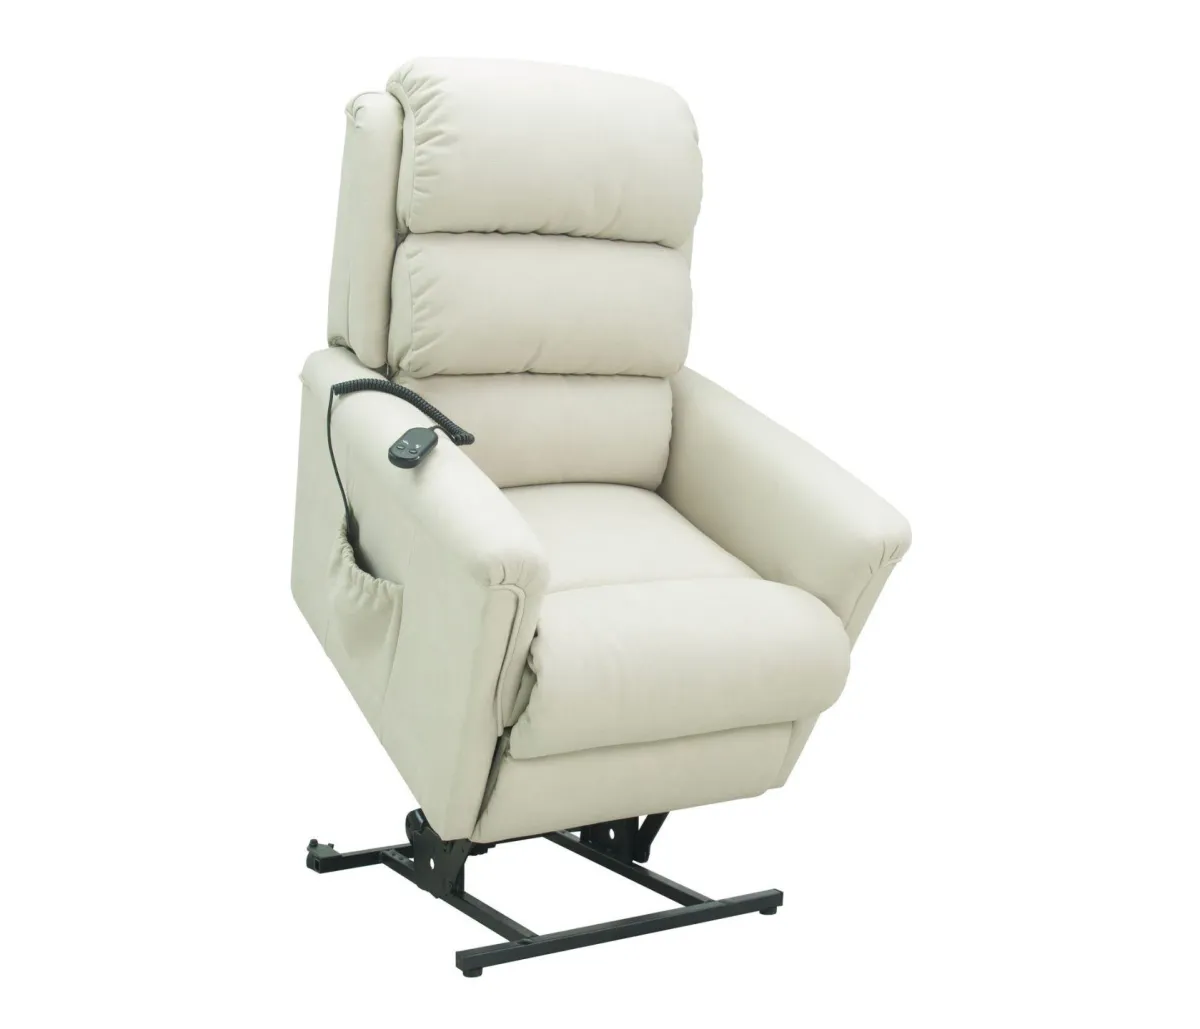 Electric Lift chair